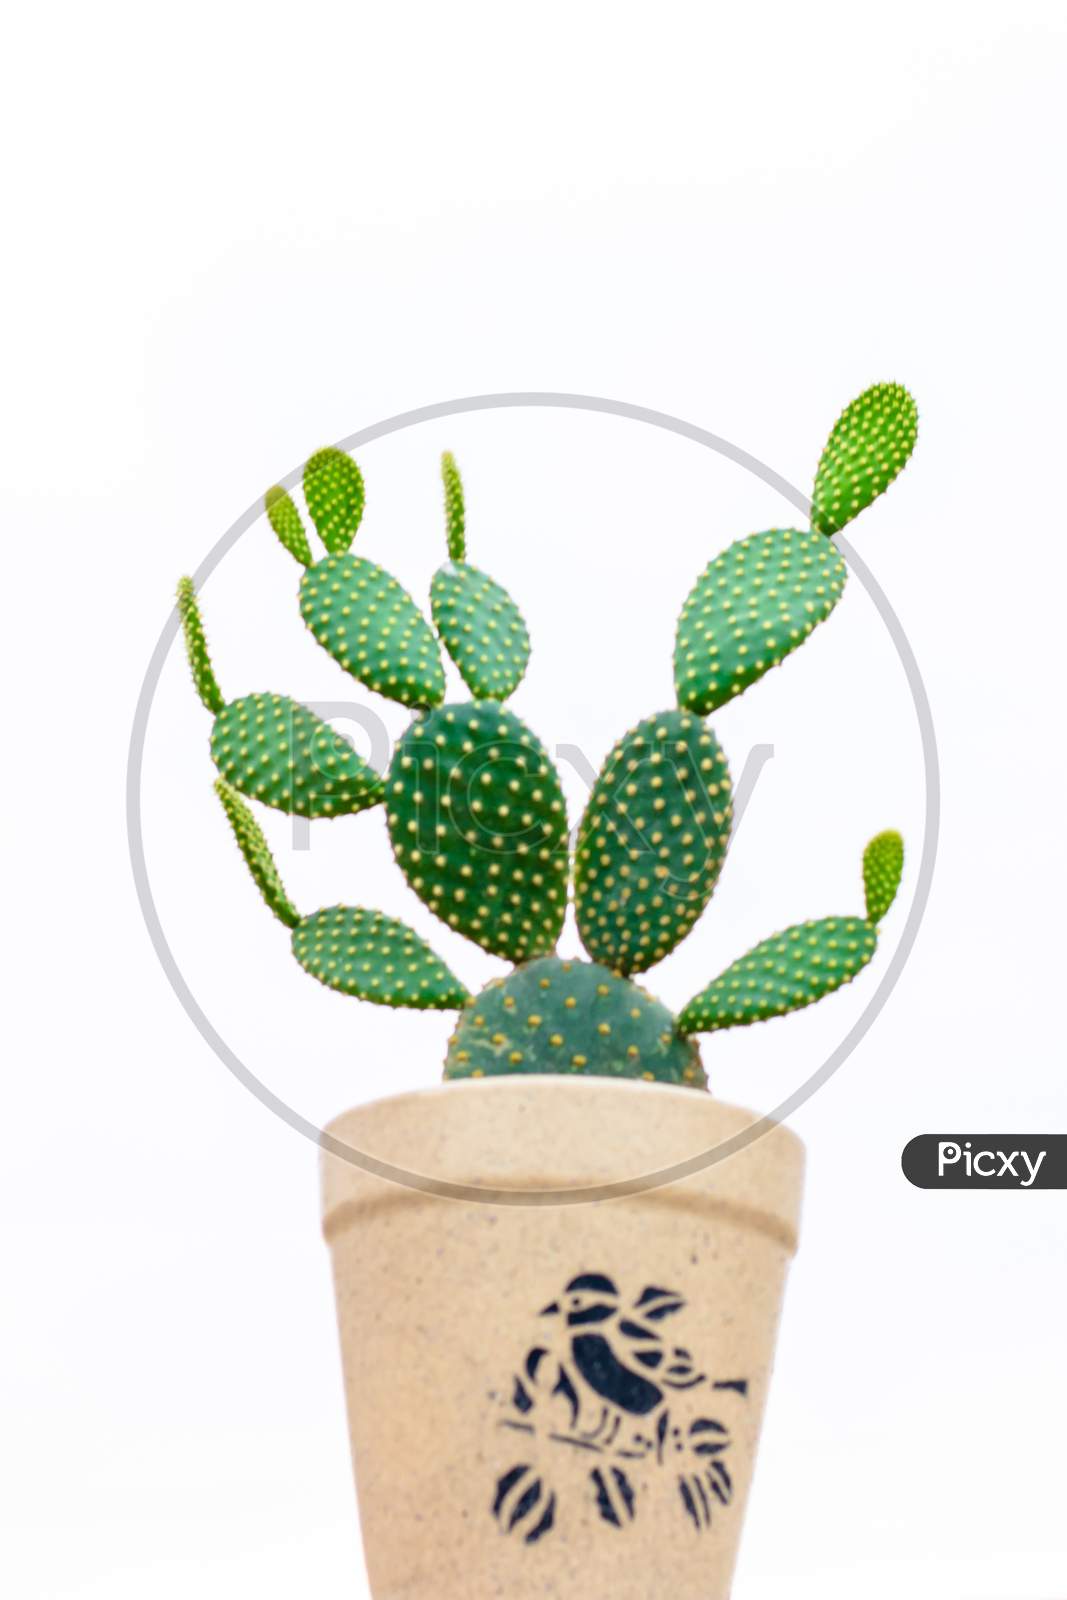 Cactus with flowerpot on isolated background. Green cactus, popular plant for collection.